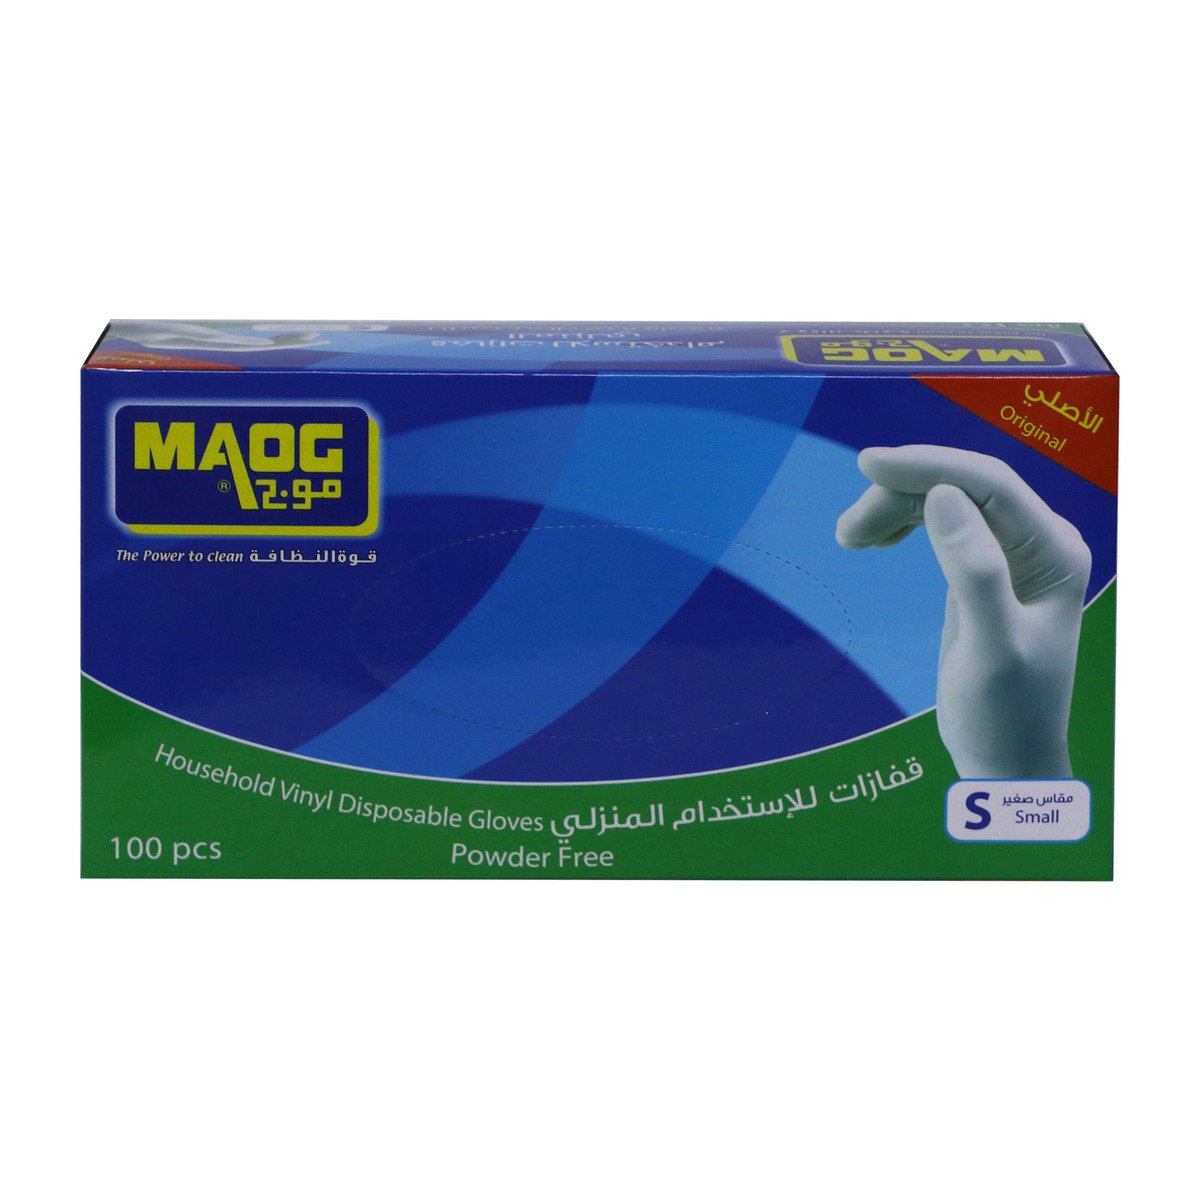 Maog Household Vinyl Disposable Gloves Powder Free Small 100pcs